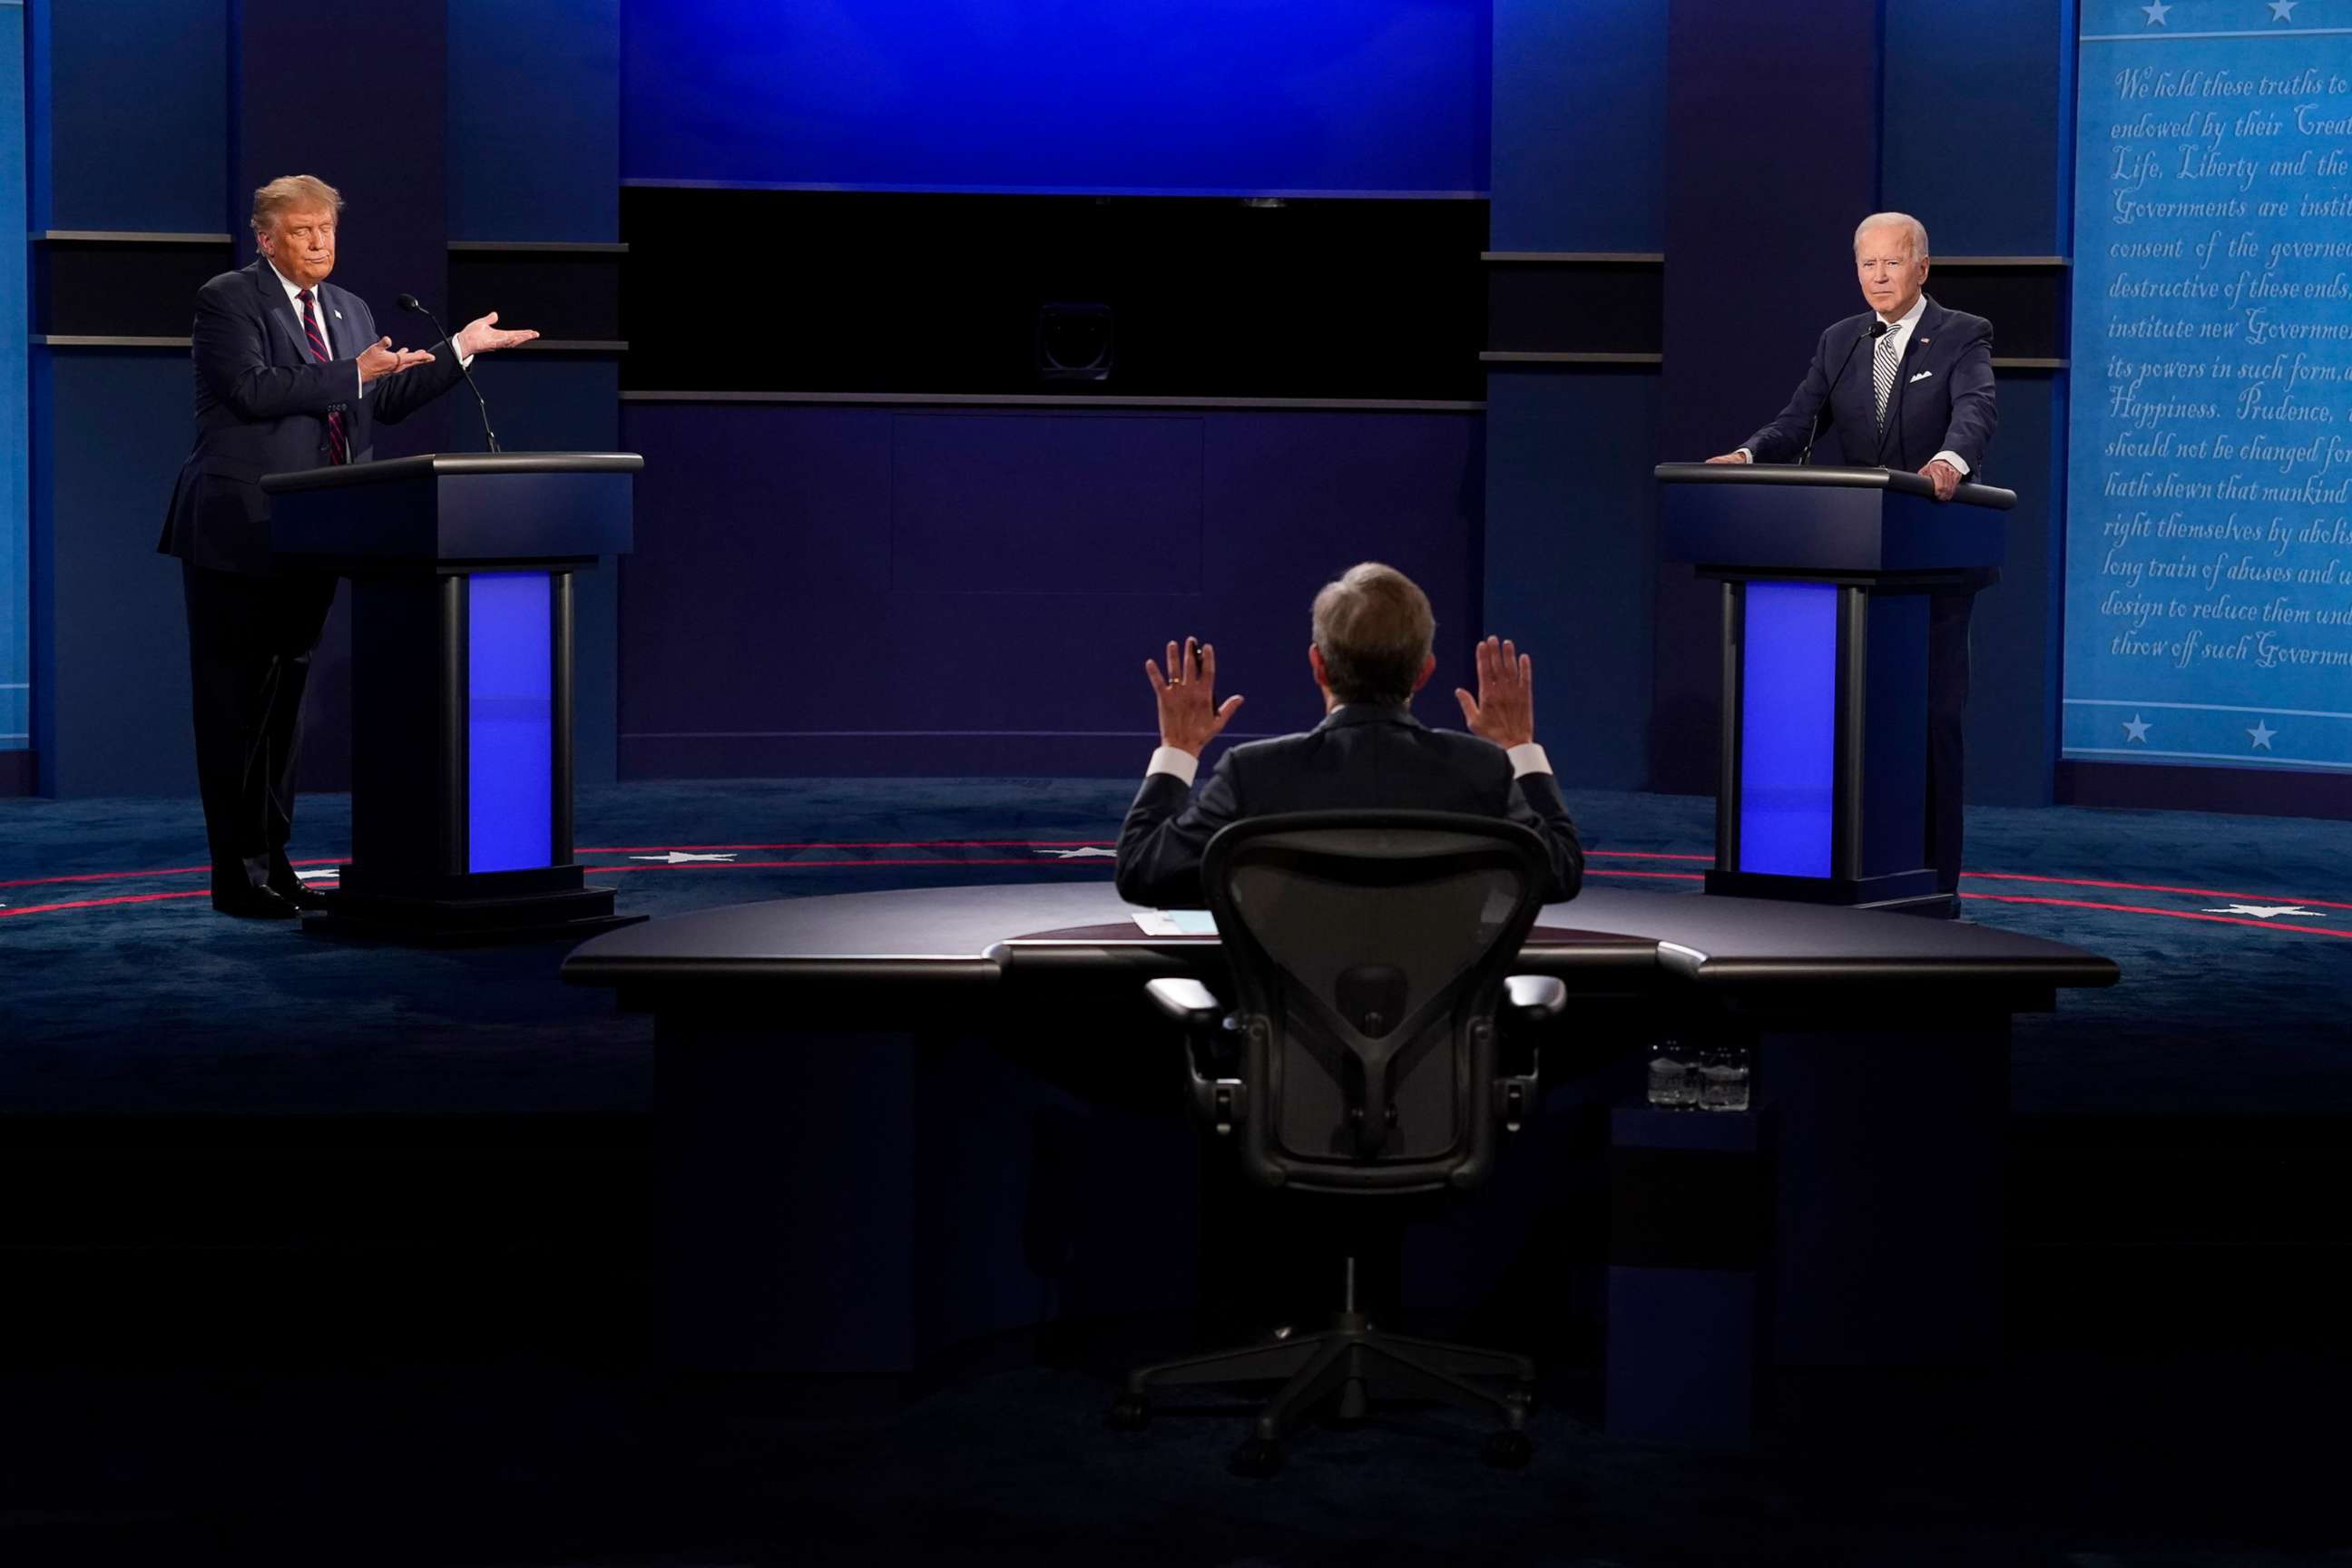 PHOTO: Moderator Chris Wallace of Fox News, center, gesturing during the first presidential debate between President Donald Trump, left, and Democratic presidential candidate former Vice President Joe Biden, right, Sept. 29, 2020, in Cleveland.